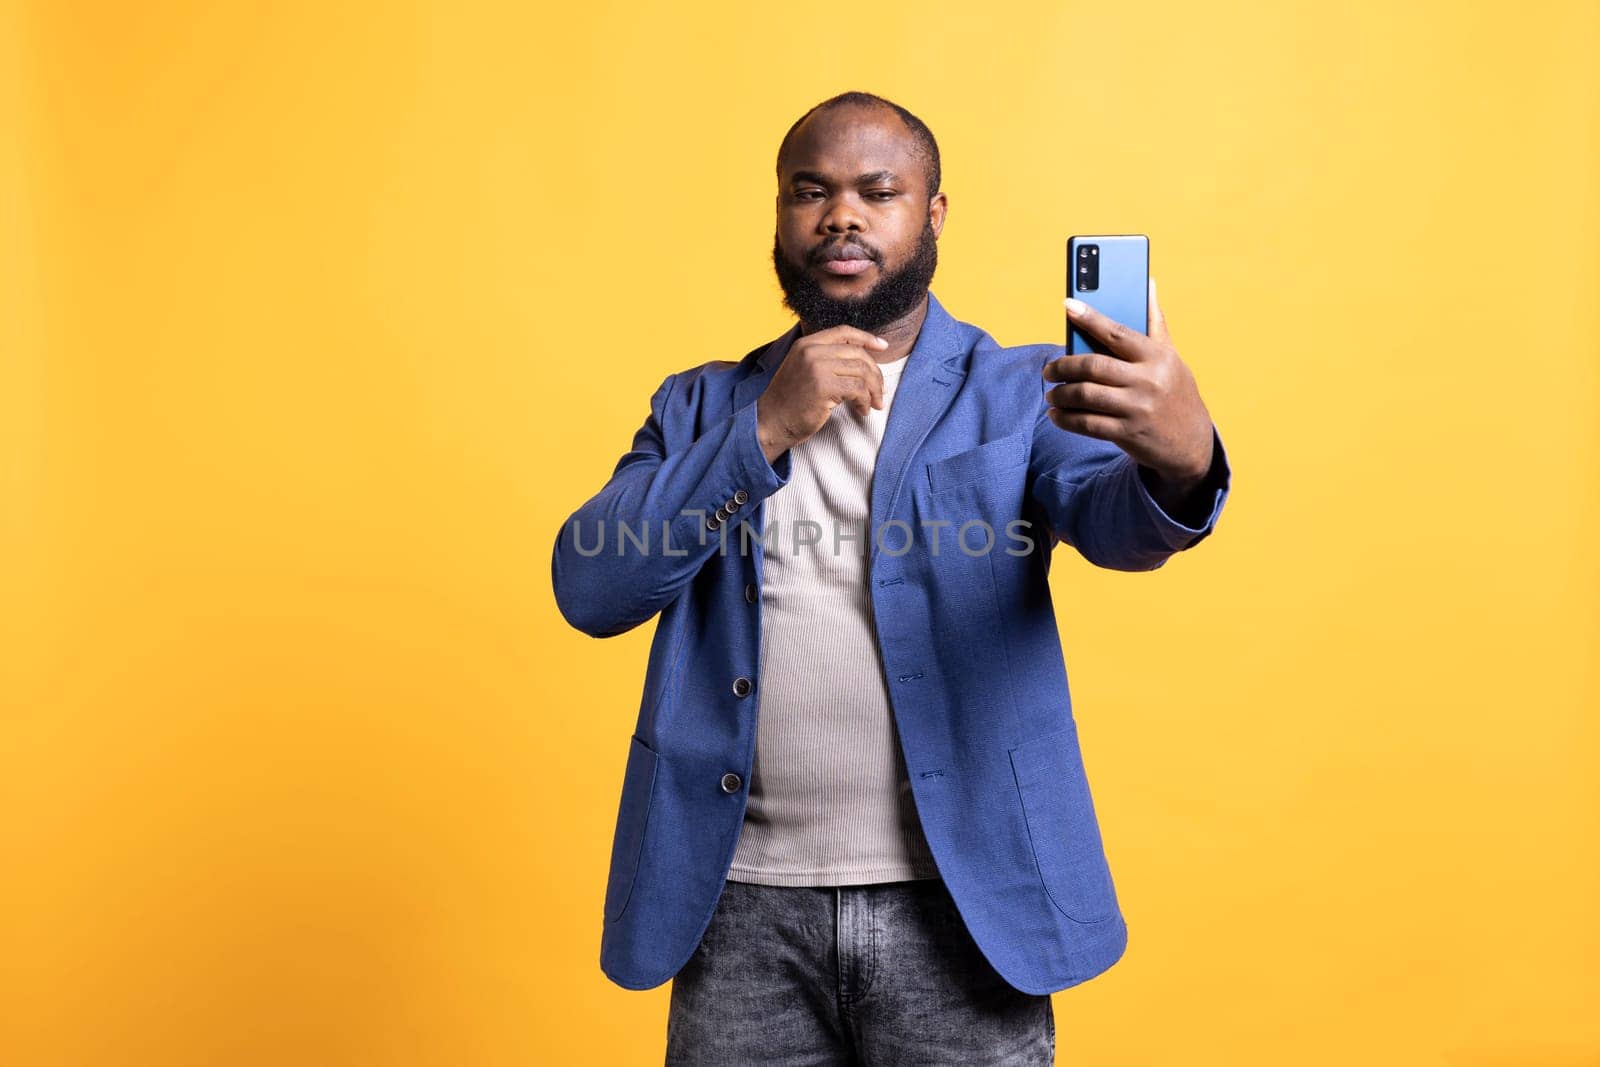 Narcissistic man using cellphone to take selfies, stroking his chin. Vain social media user taking photos using phone selfie camera, isolated over yellow studio background